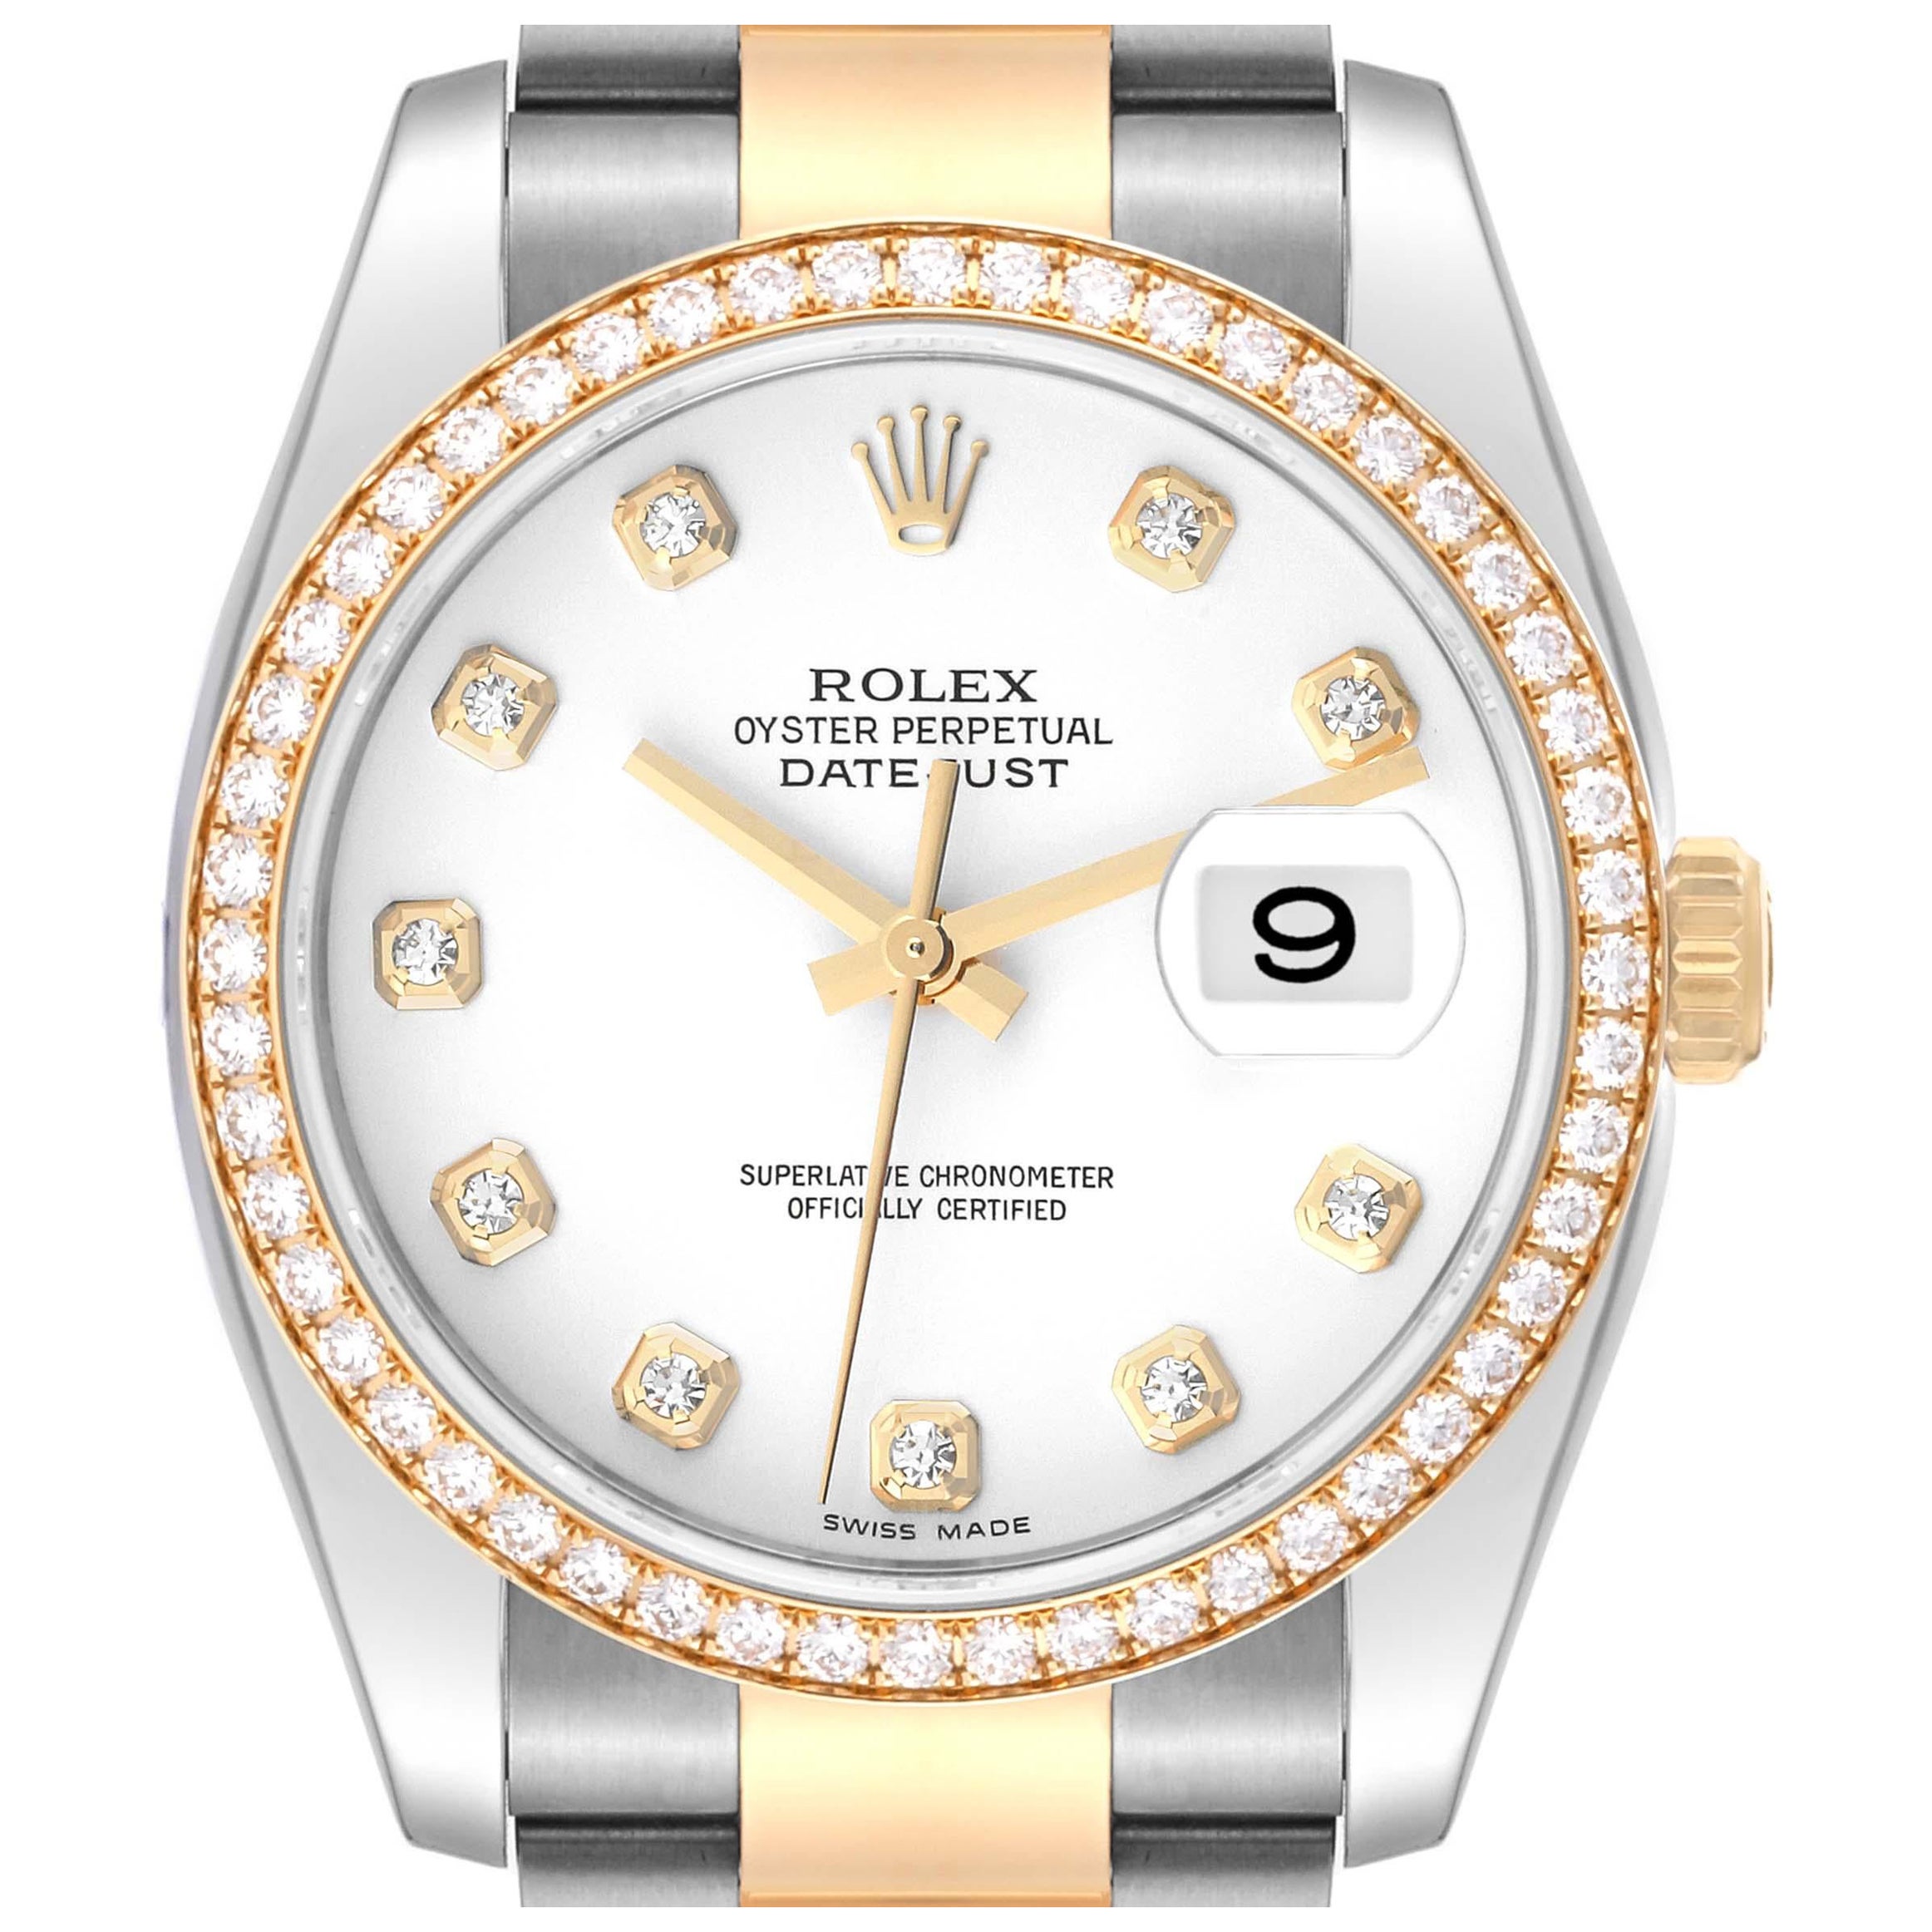 Rolex Datejust Steel Yellow Gold Diamond Mens Watch 116243 Box Card For Sale